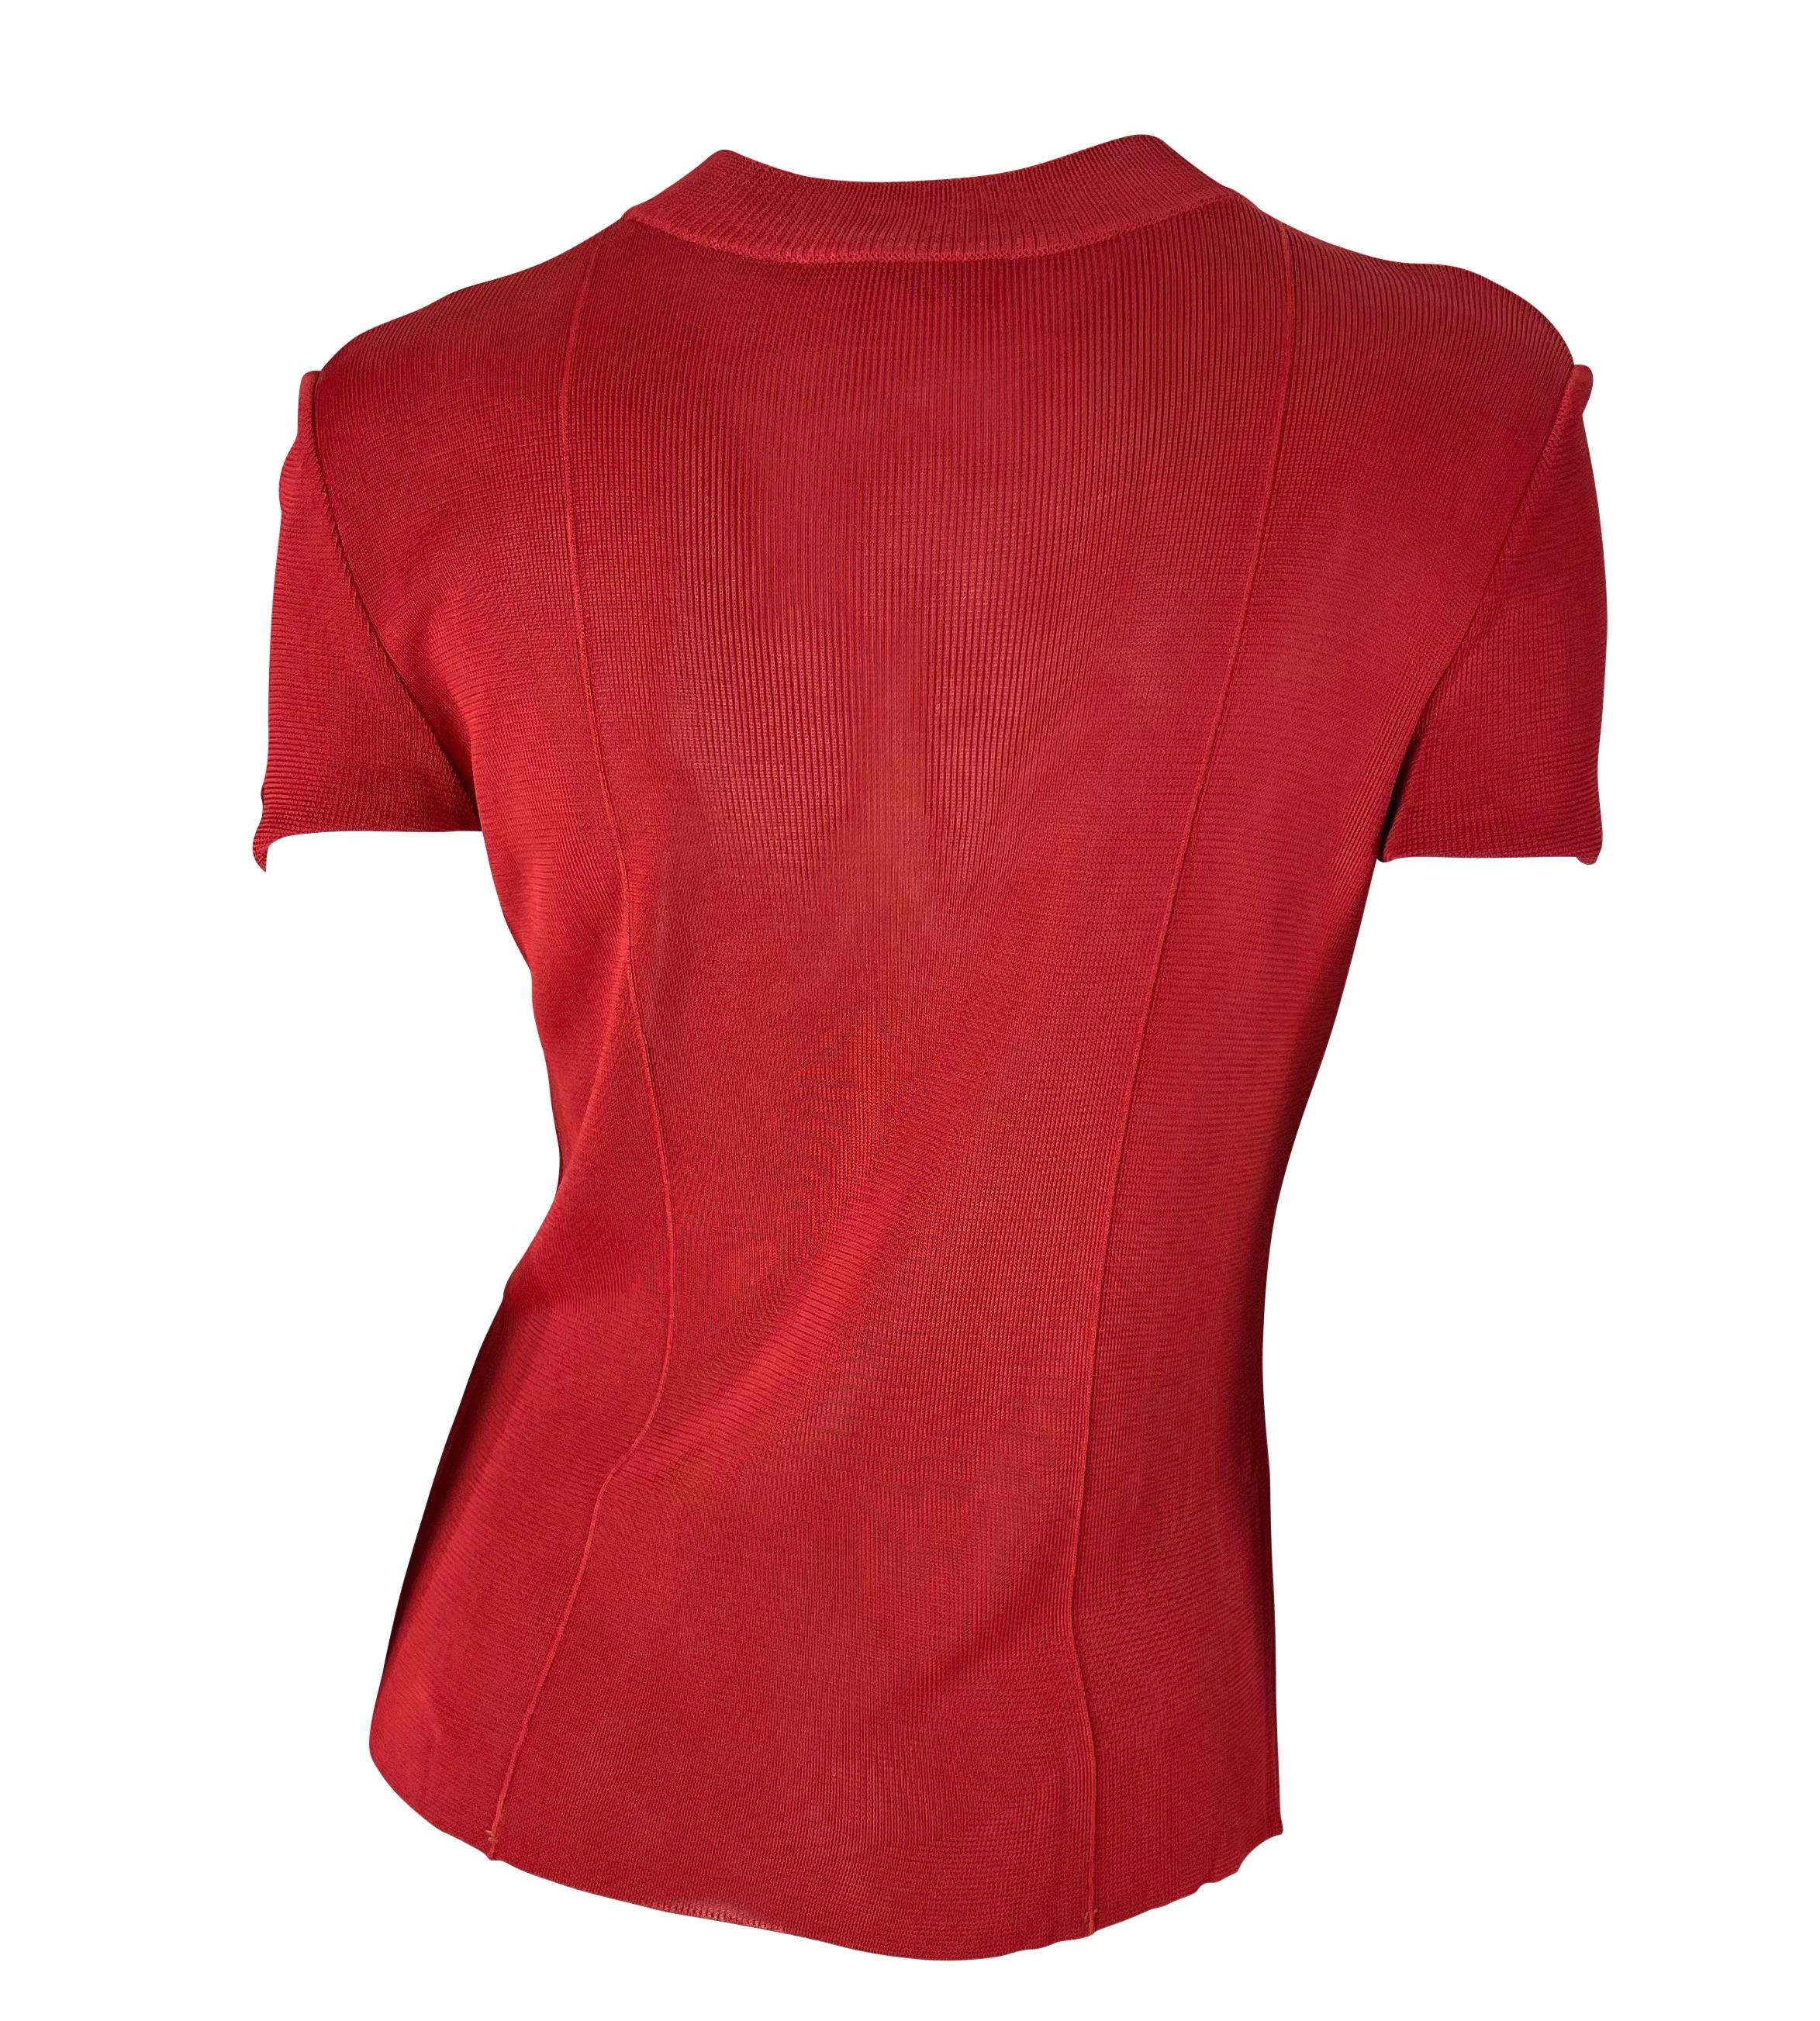 S/S 1997 Gucci by Tom Ford Red G Logo Medallion Viscose Stretch Knit Top In Good Condition For Sale In West Hollywood, CA